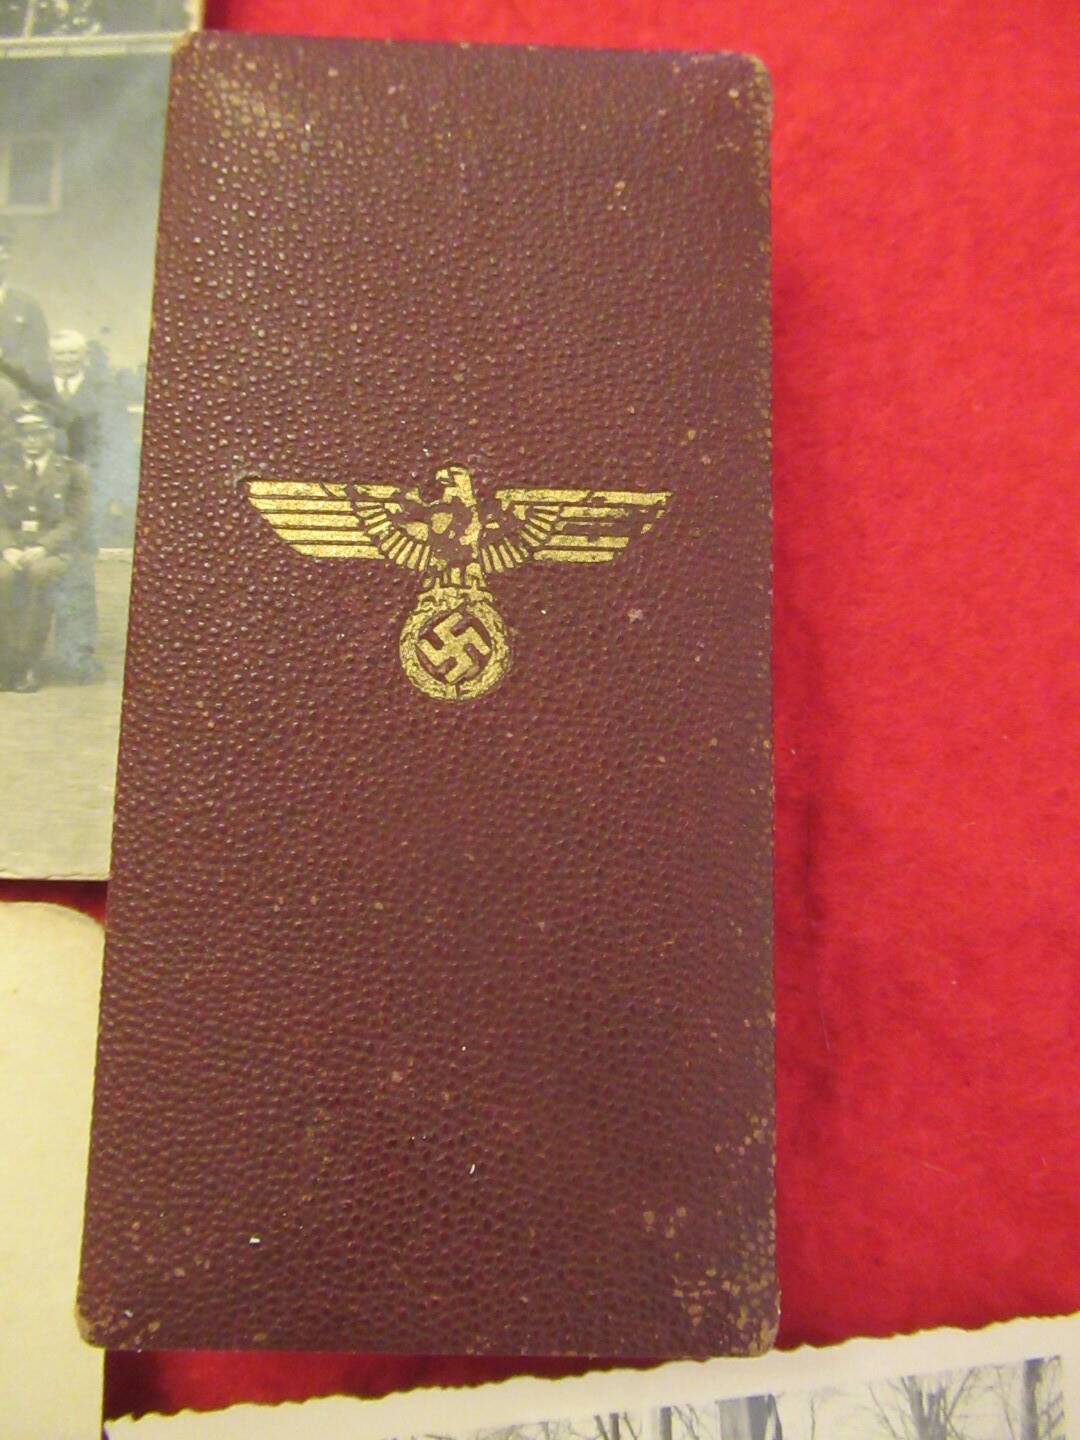 1 Oct 38 boxed medal with award documents and pictures of recipient